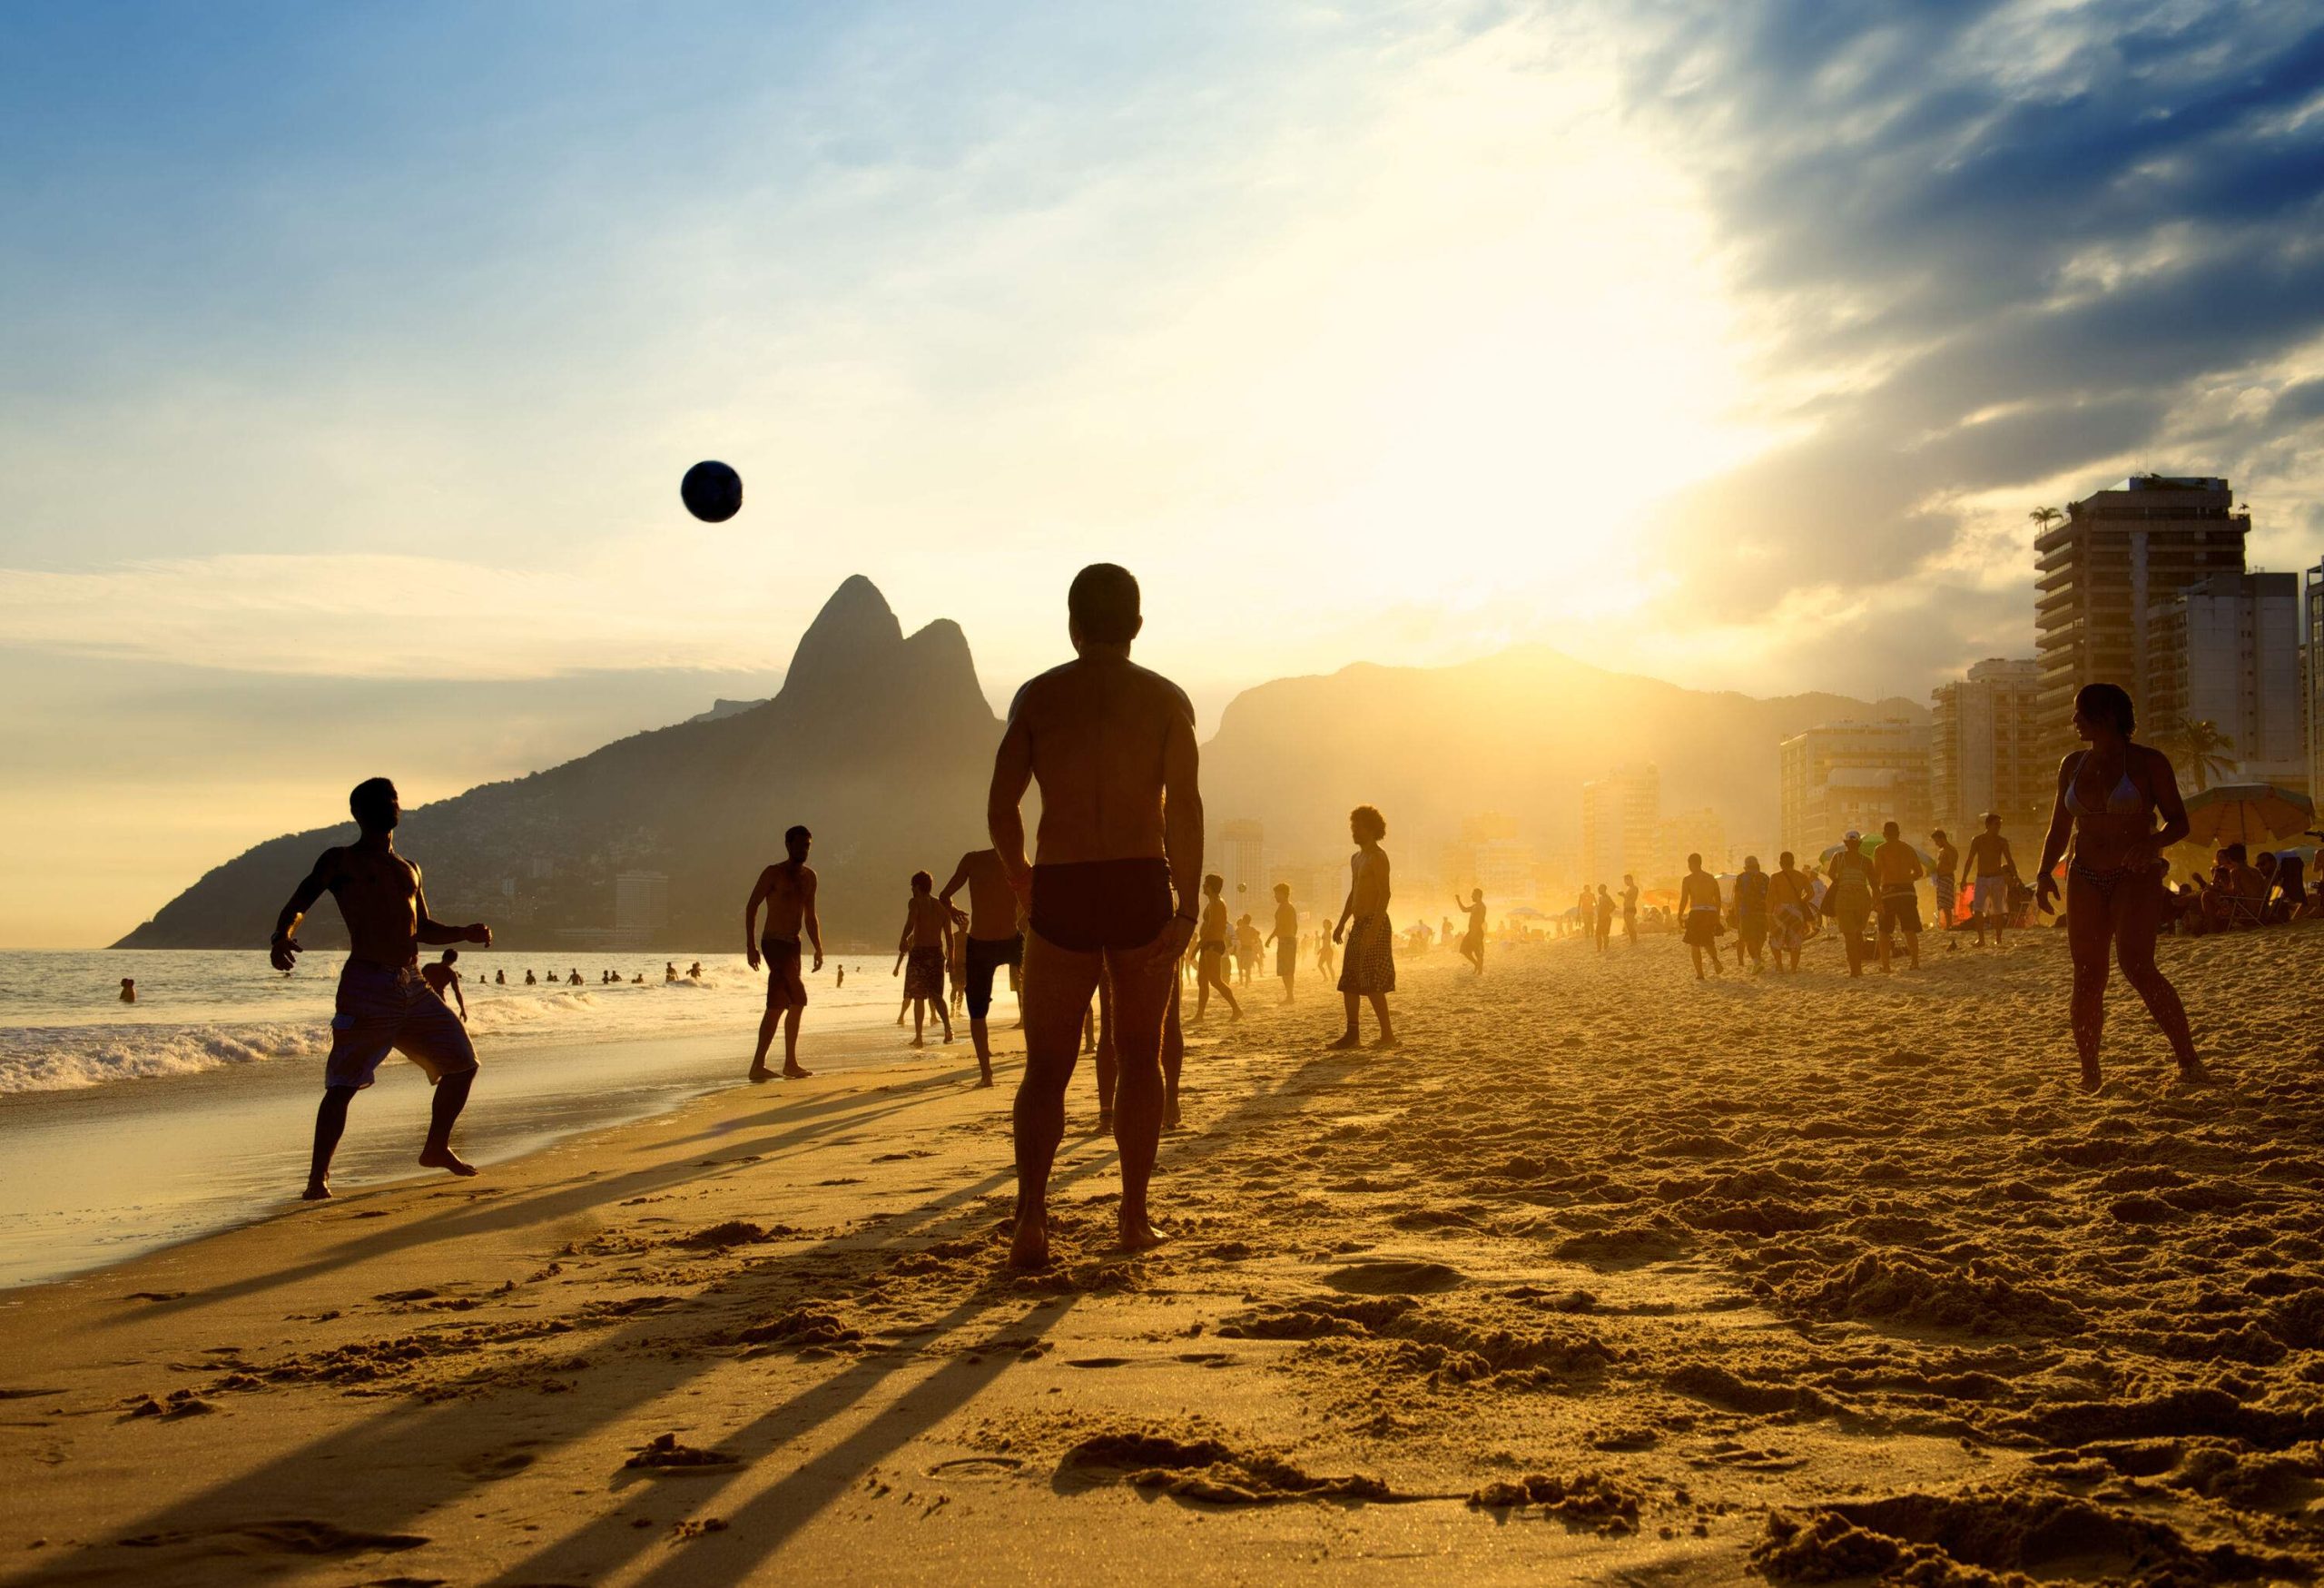 A crowded beach with a group of people playing a ball on a scenic sunset.